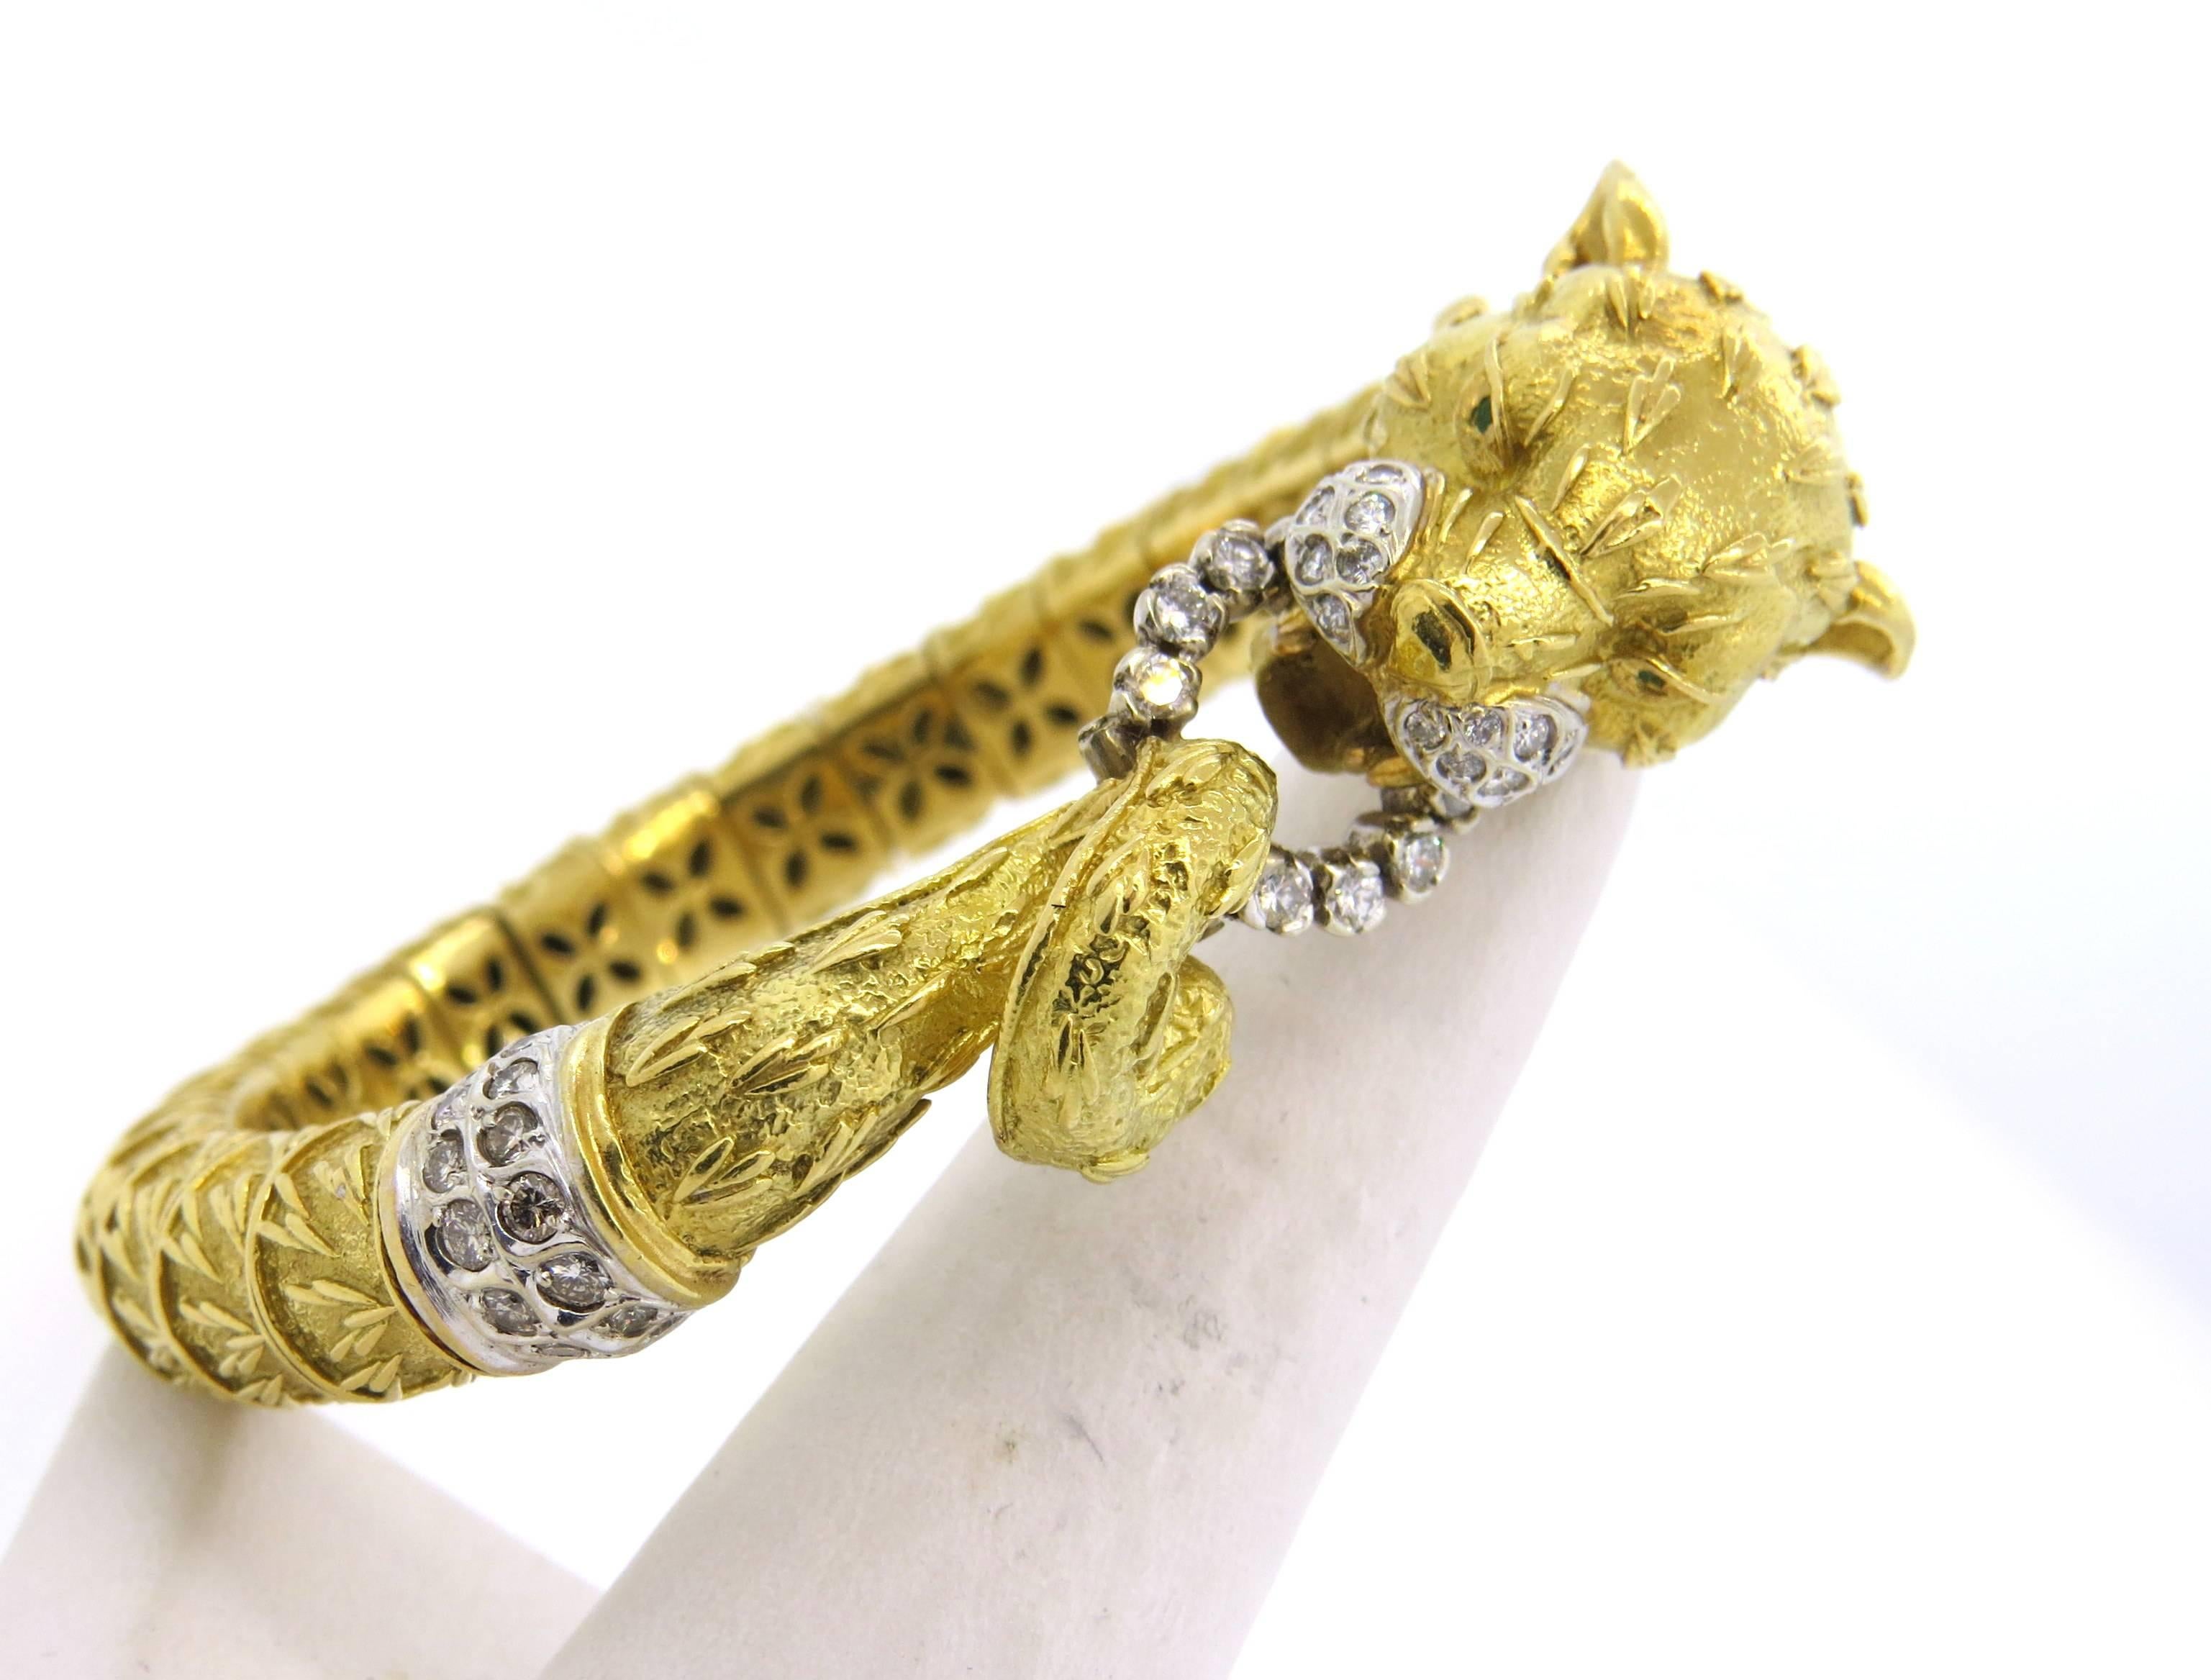 Large 18k yellow gold bangle bracelet, crafted by Frascarolo, featuring panther head, decorated with emerald eyes and approximately 1.08ctw in GH/VS diamonds. Bracelet will comfortably fit up to 7